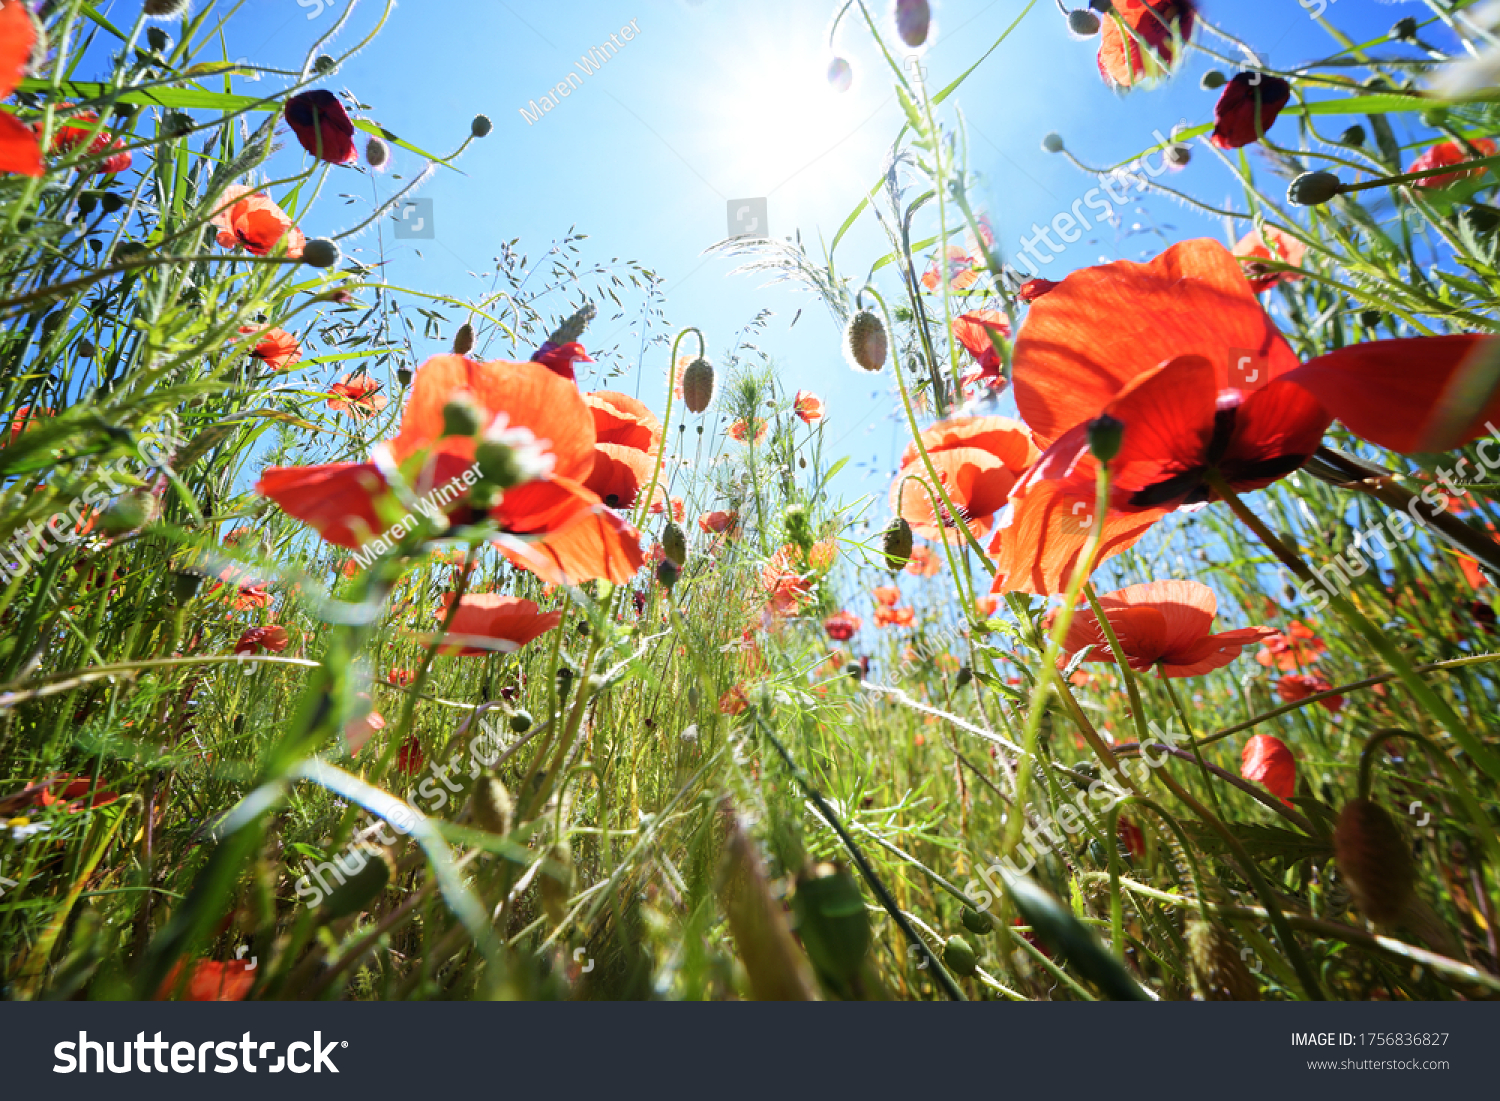 Corn poppy (Papaver rhoeas) with vibrant red flowers on a meadow under a sunny blue sky, copy space, low angle view, selected focus, narrow depth of field #1756836827